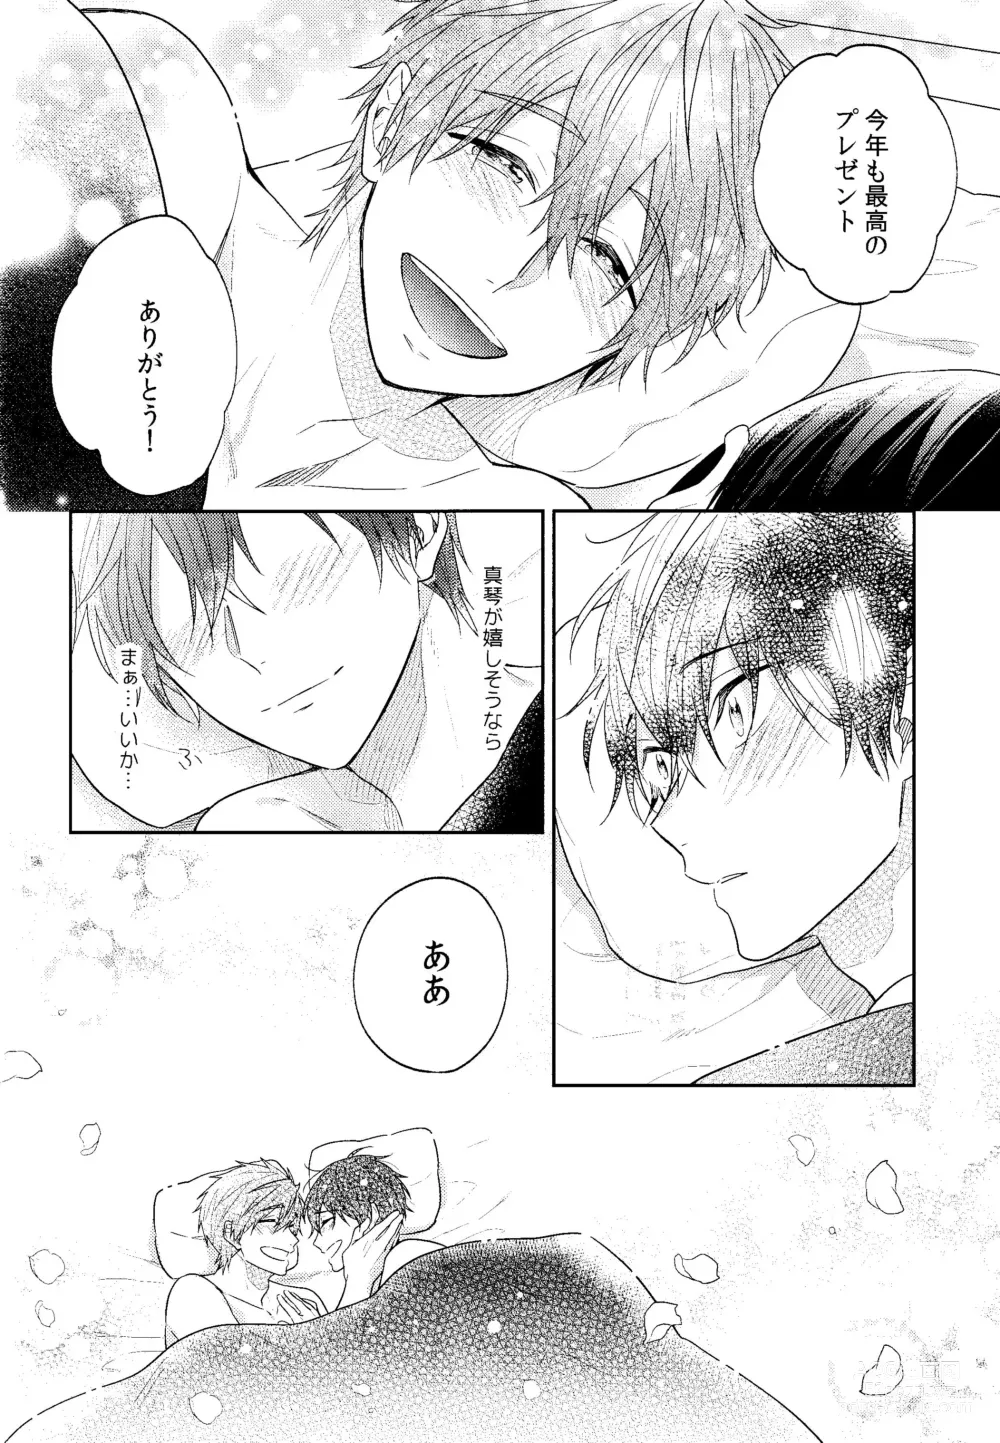 Page 19 of doujinshi Happy Birthday present is me